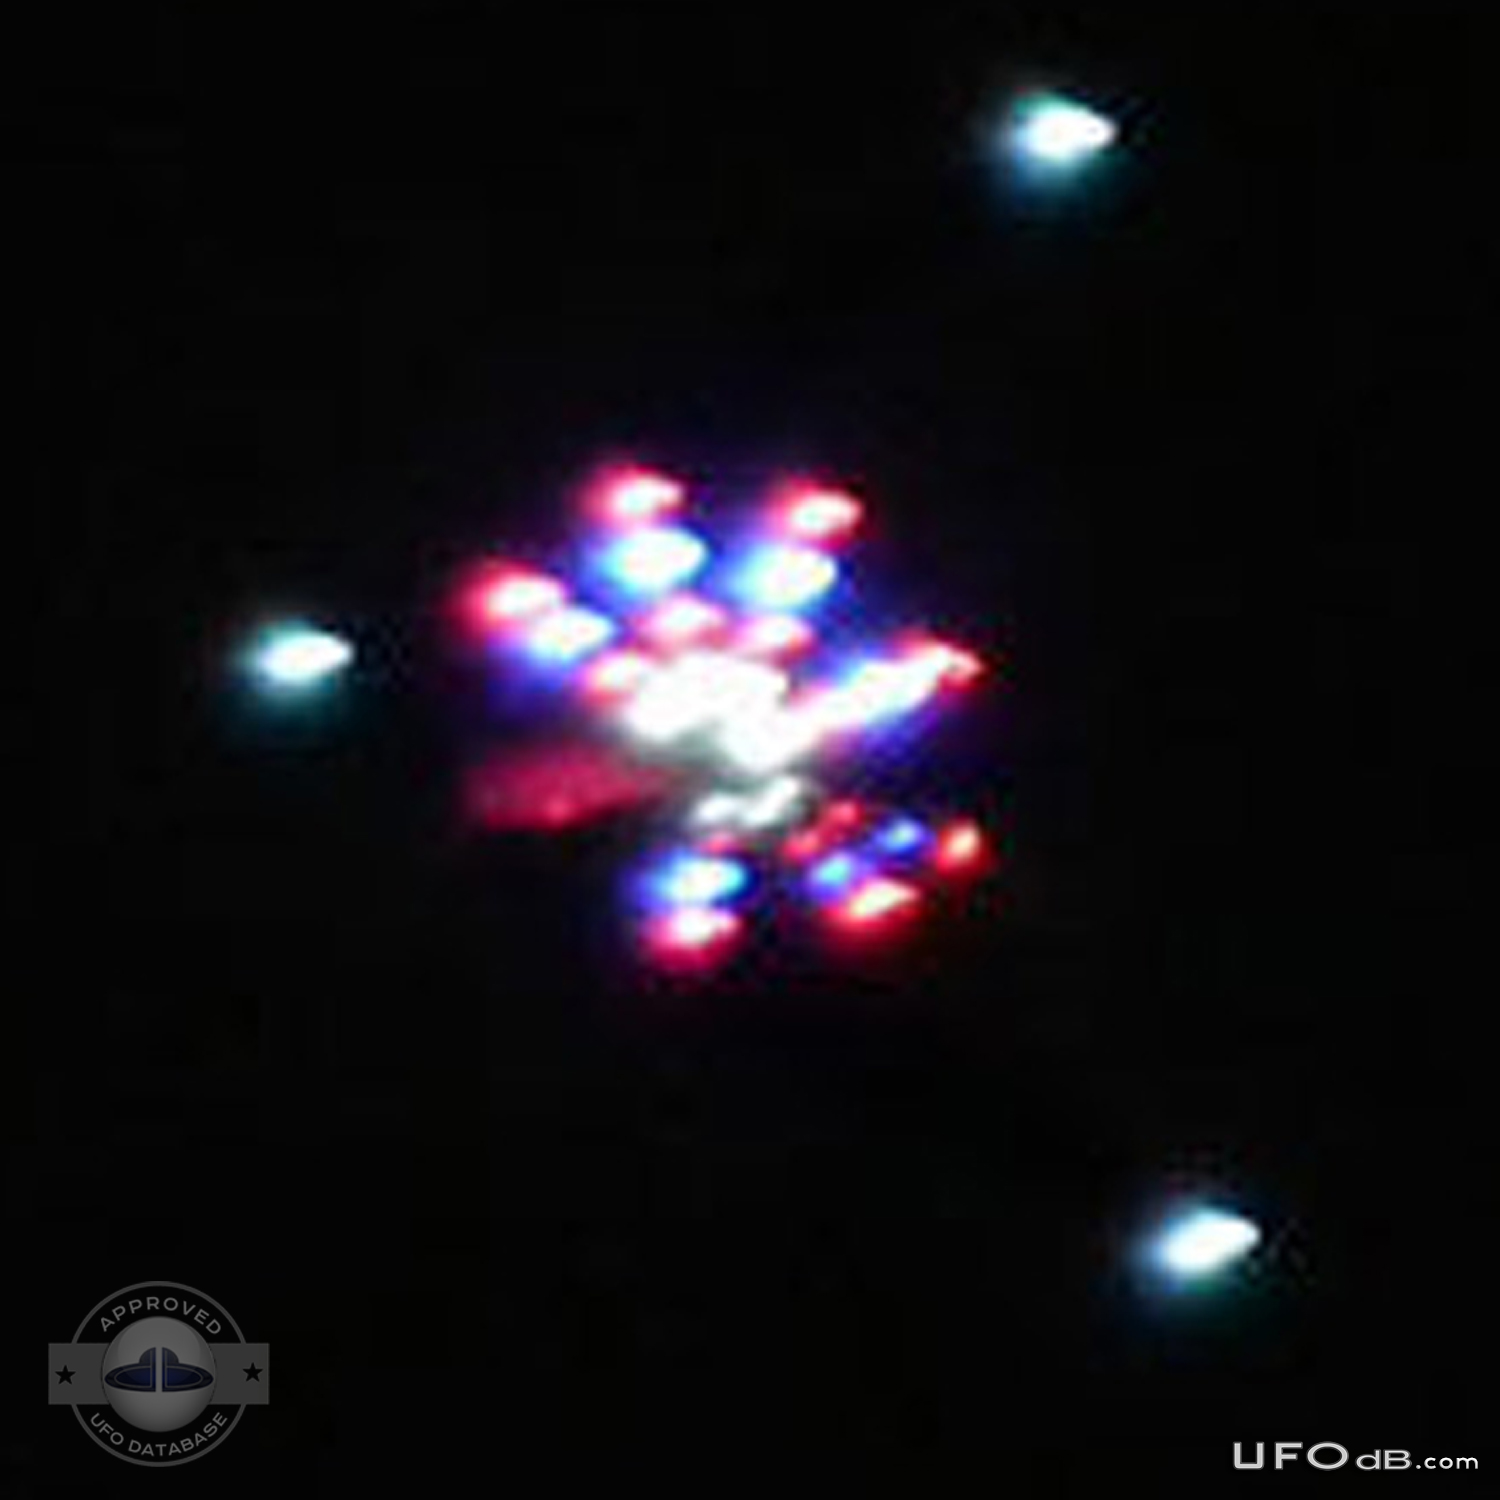 Mr. Shaw photograph a Triangular UFO formation - China - April 30 2011 UFO Picture #281-3